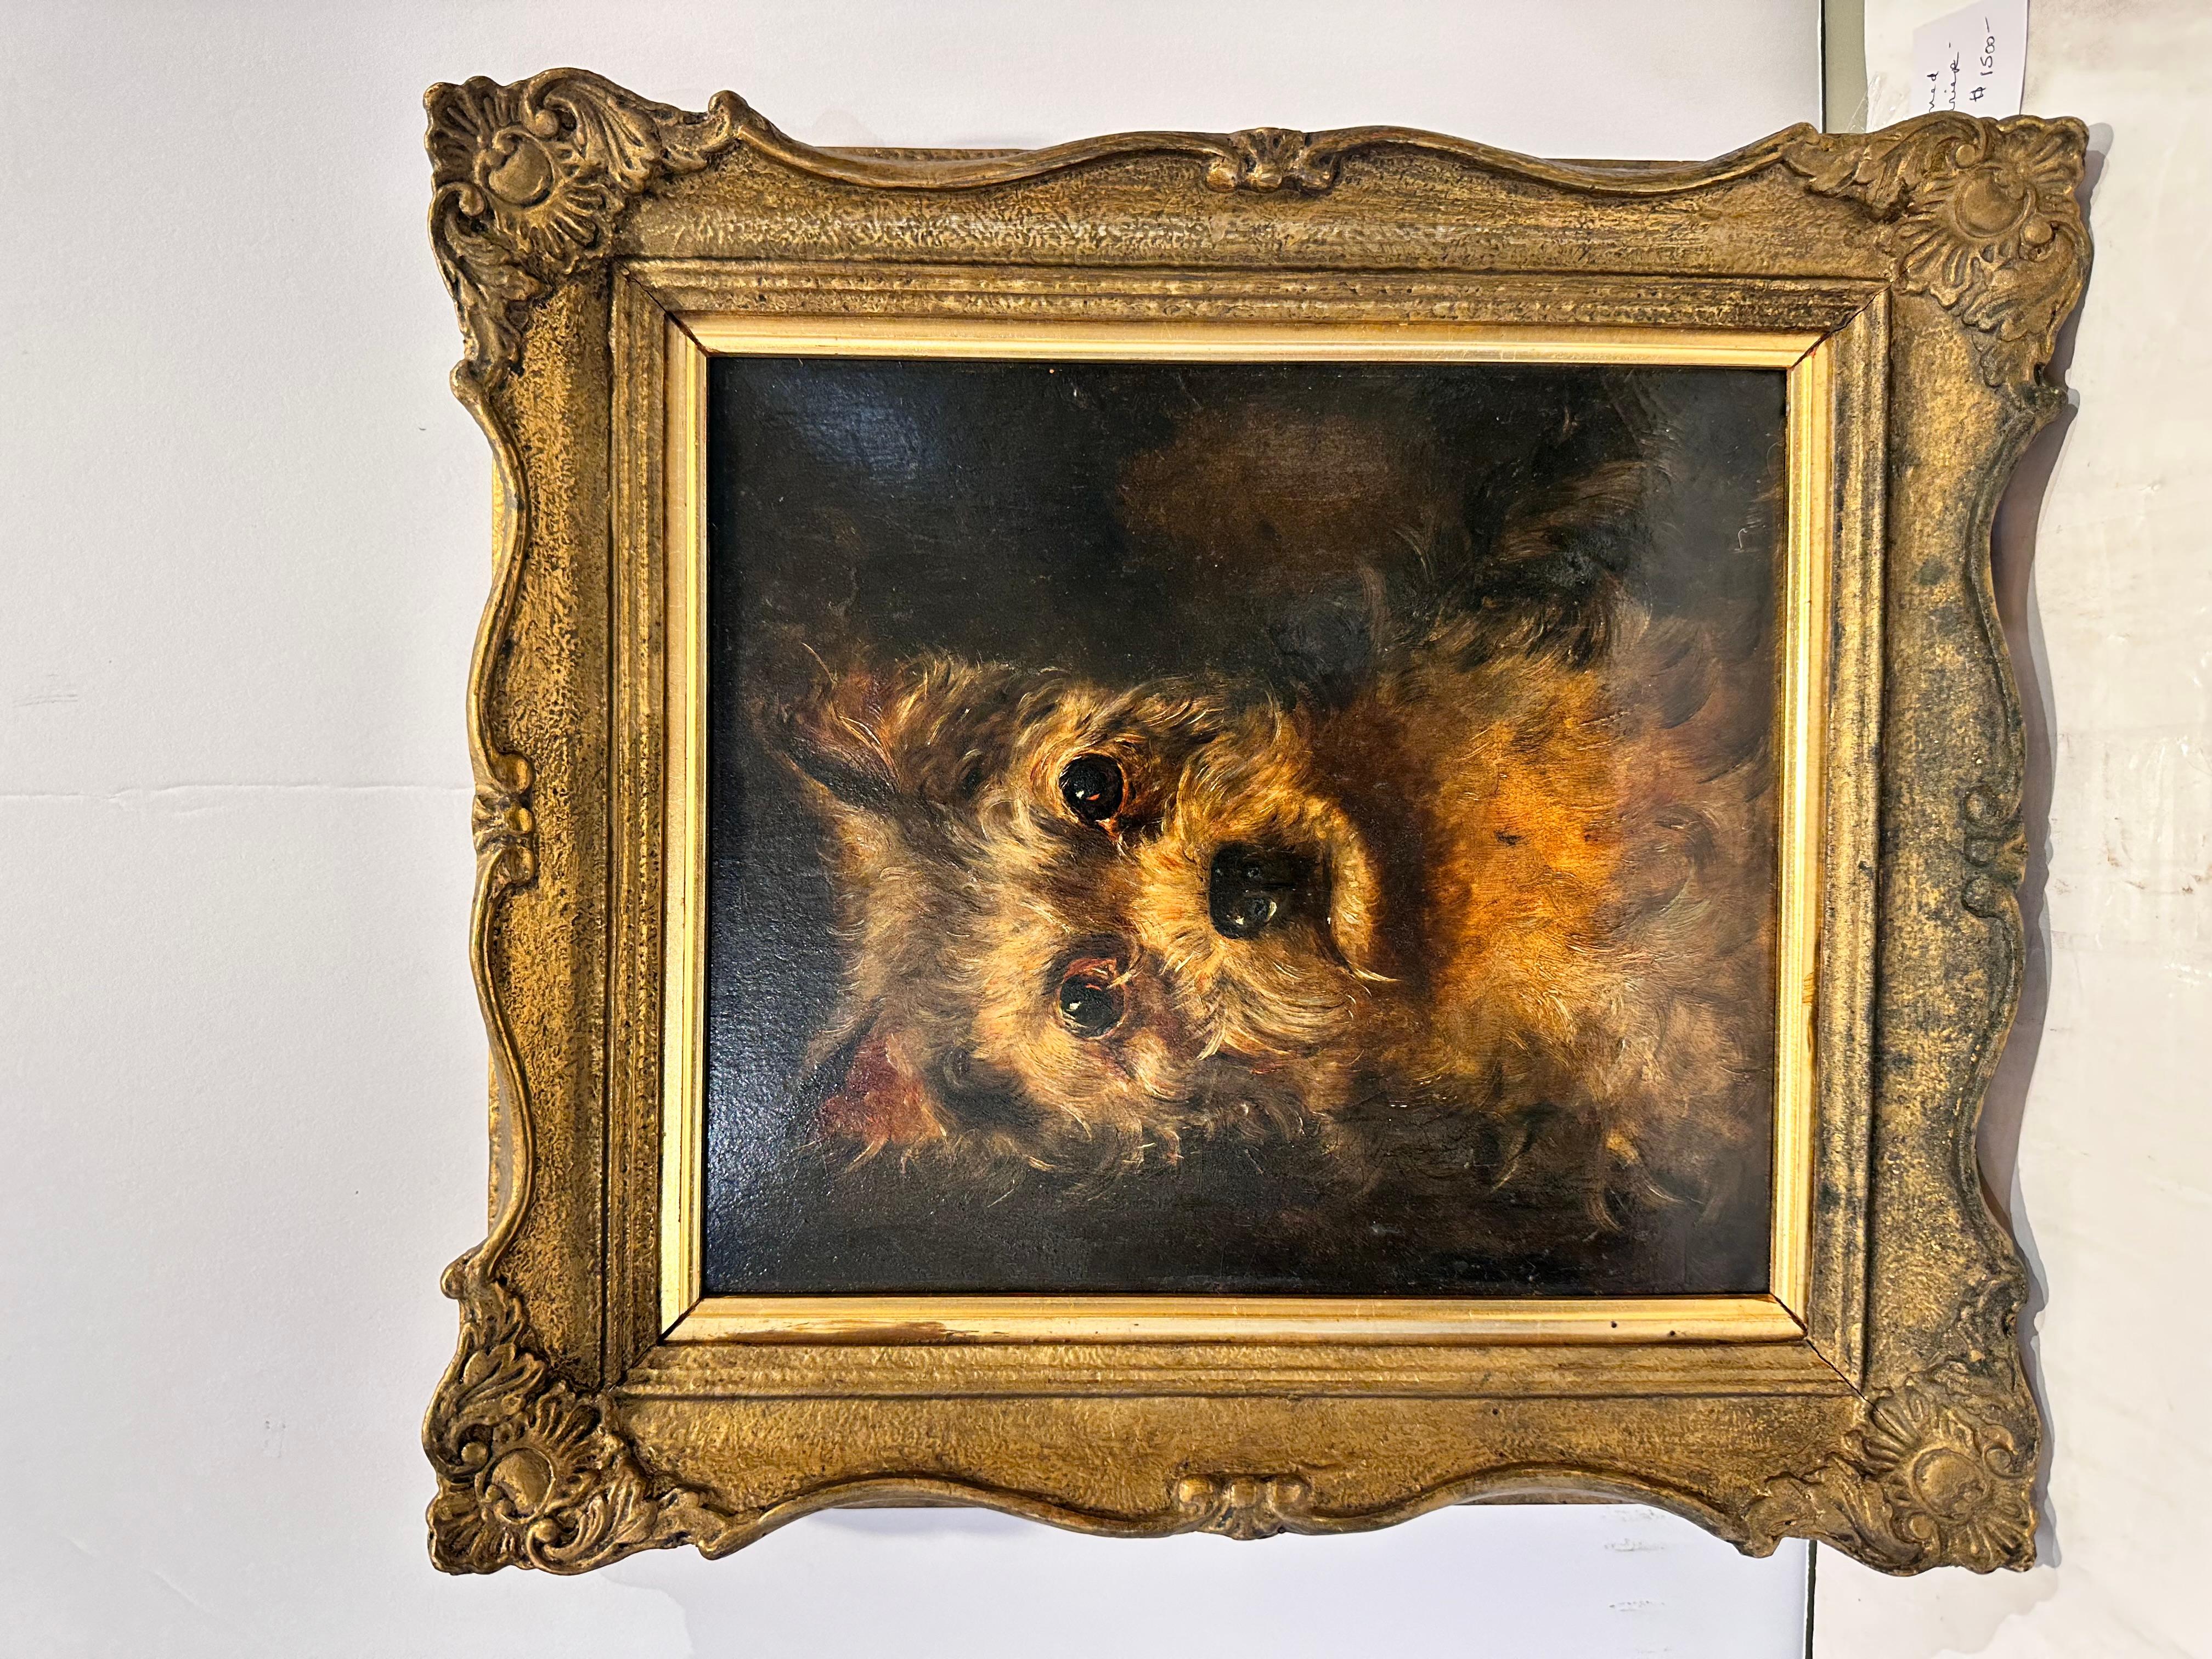 This classic style 19th century oil painting features an adorable yorkshire terrier. The painting mixes colors like tan, gold, orange, black and brown into a warm cozy focus around the little dogs face. The antique gold frame adds extra charm with